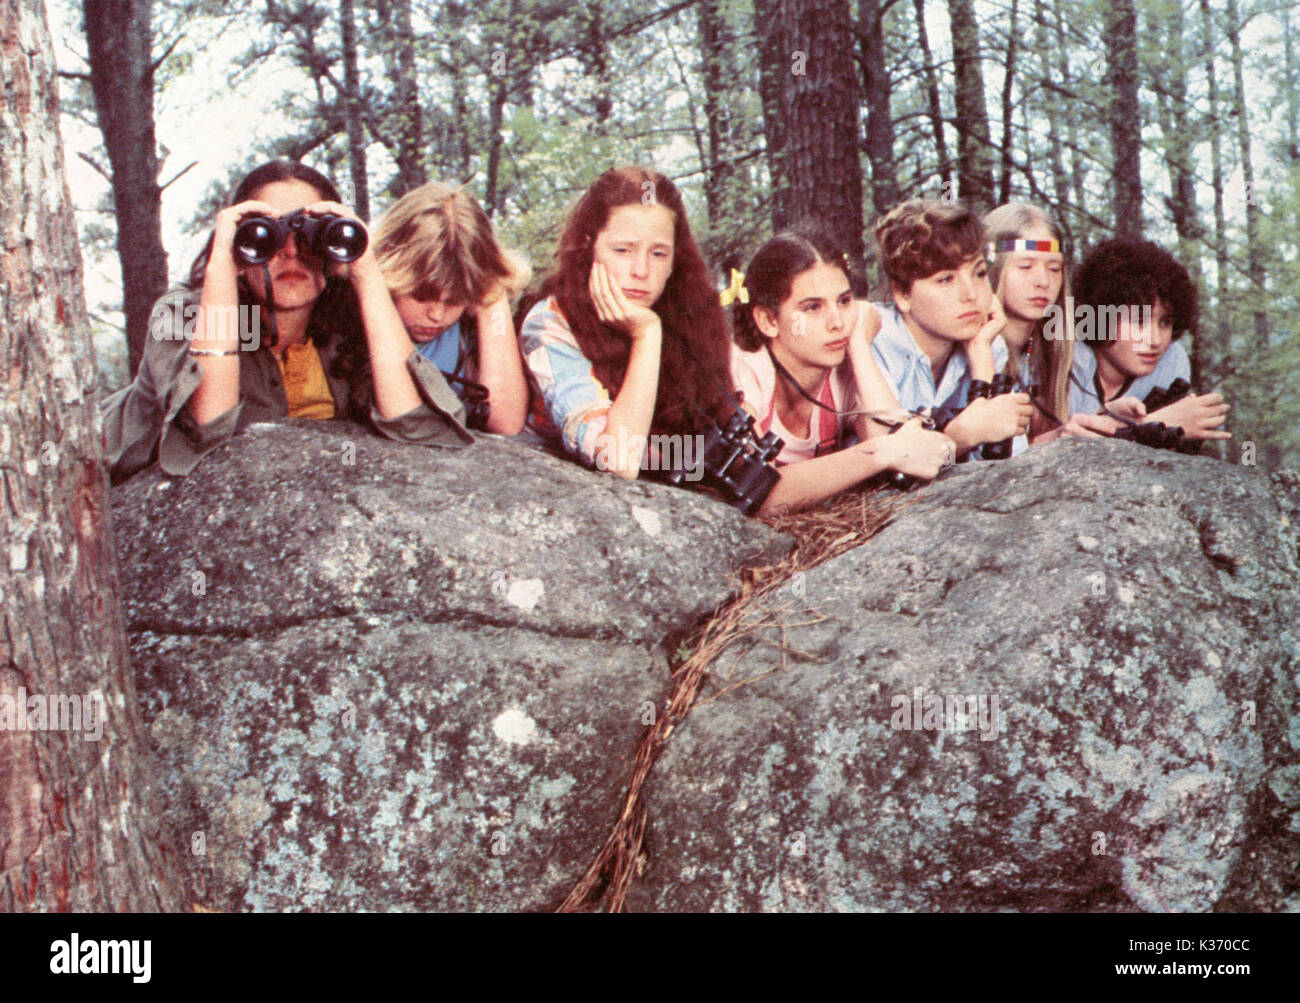 LITTLE DARLINGS CYNTHIA NIXON 6TH FROM THE LEFT A PARAMOUNT PICTURE     Date: 1980 Stock Photo